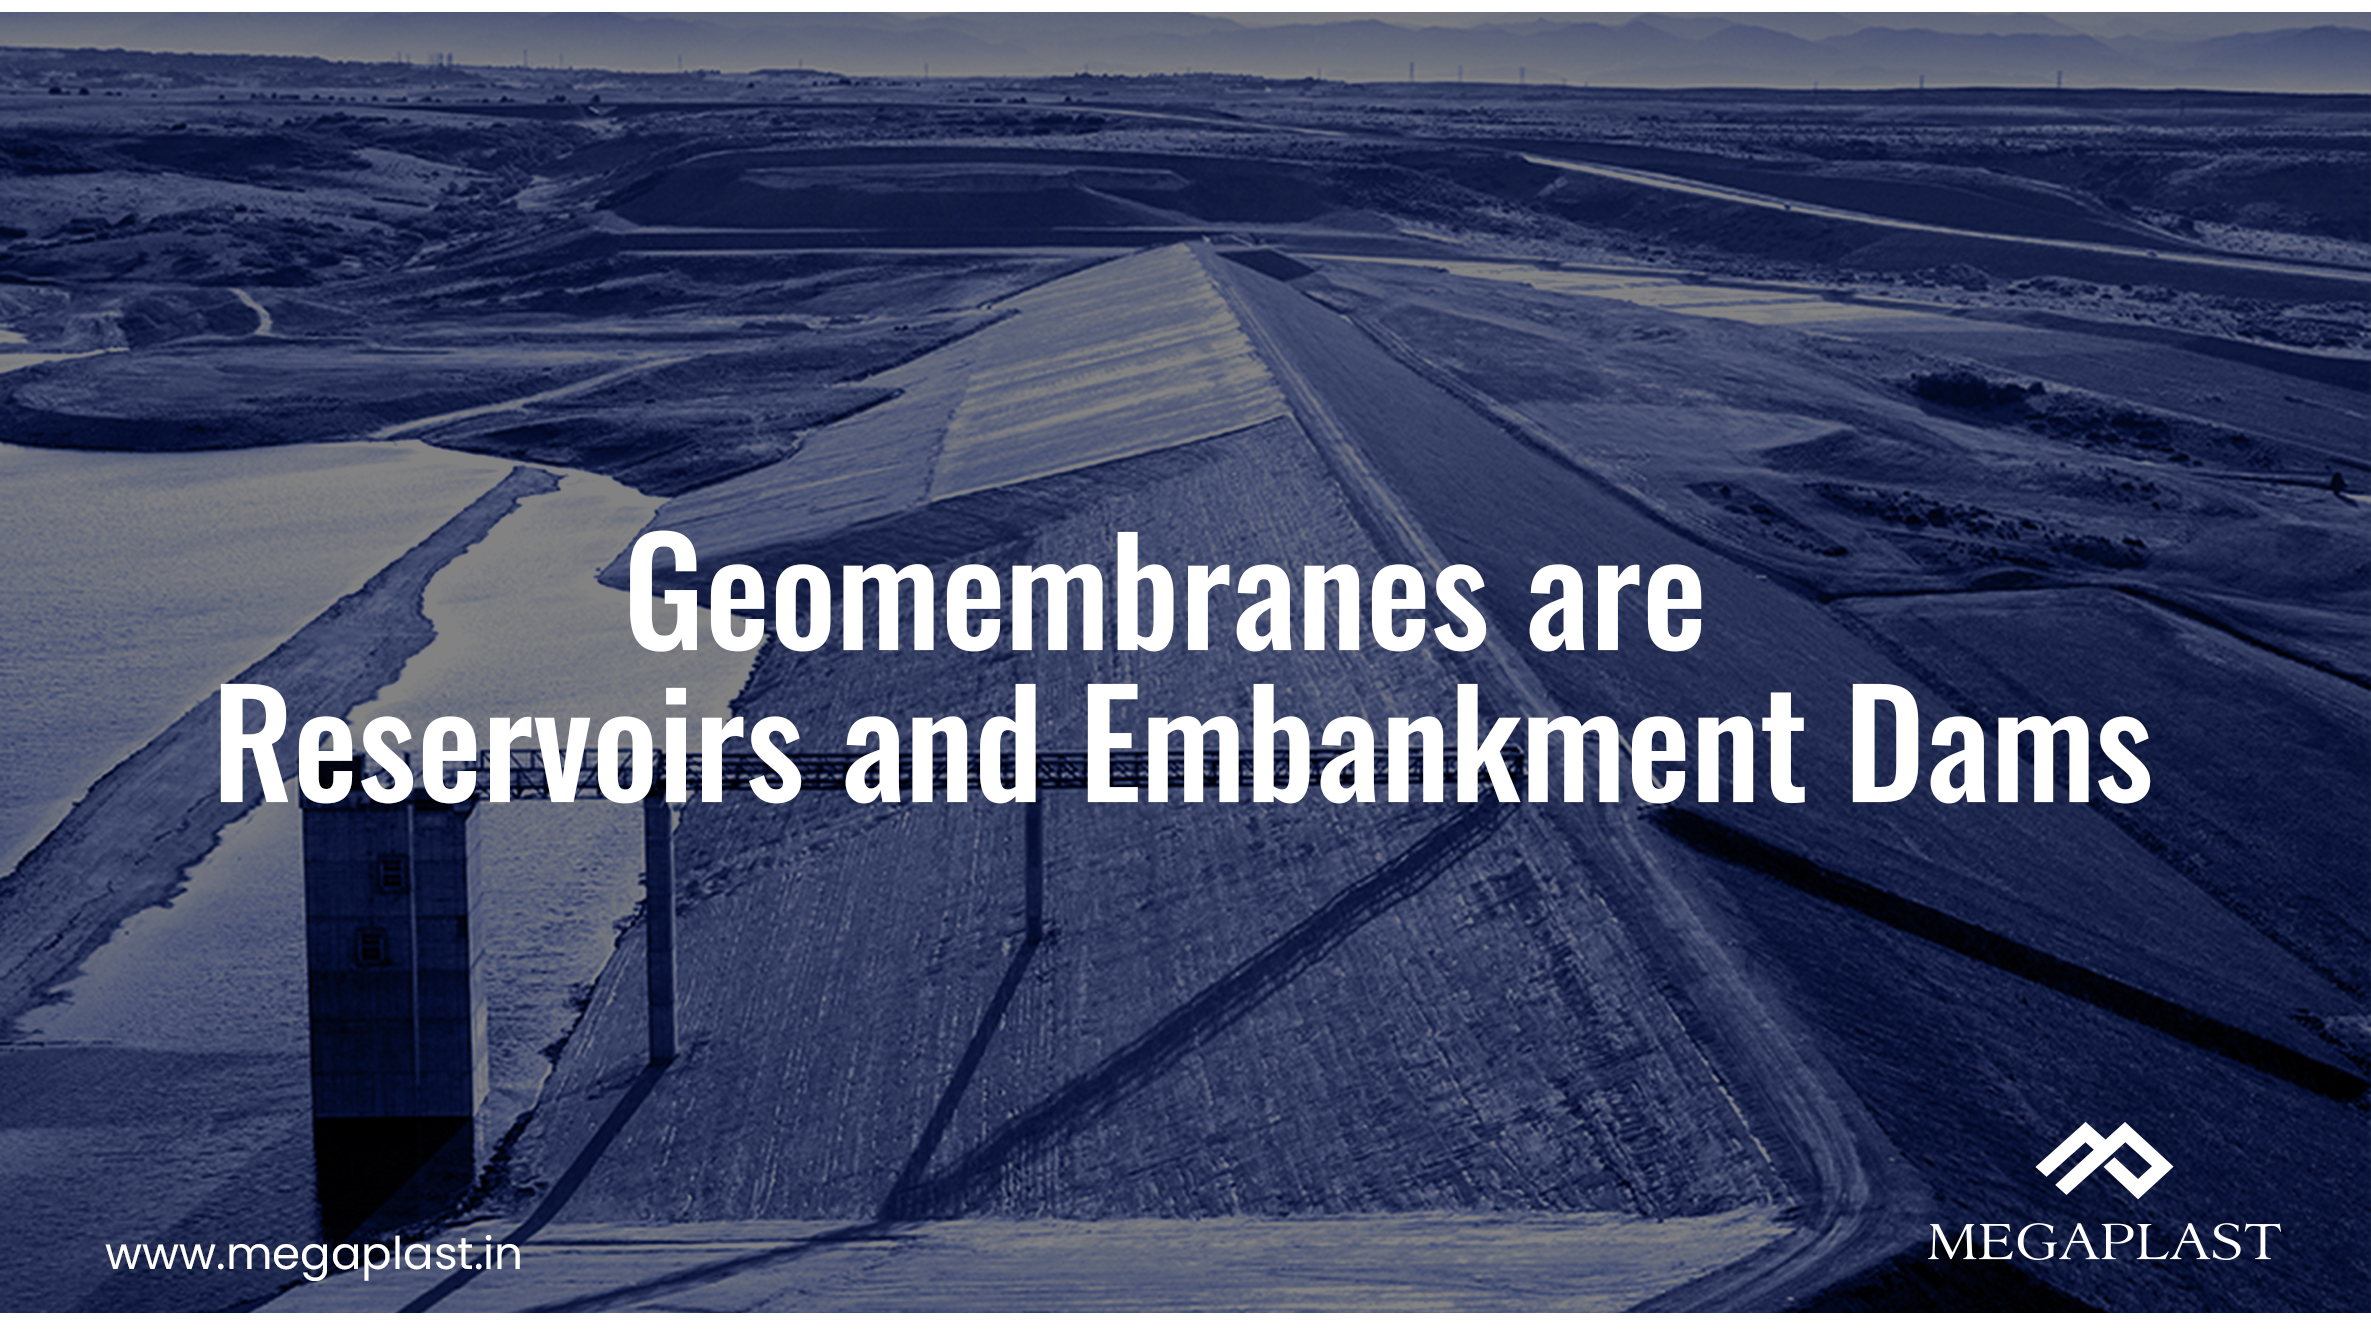 Geomembranes for Reservoirs and Embankment Dams